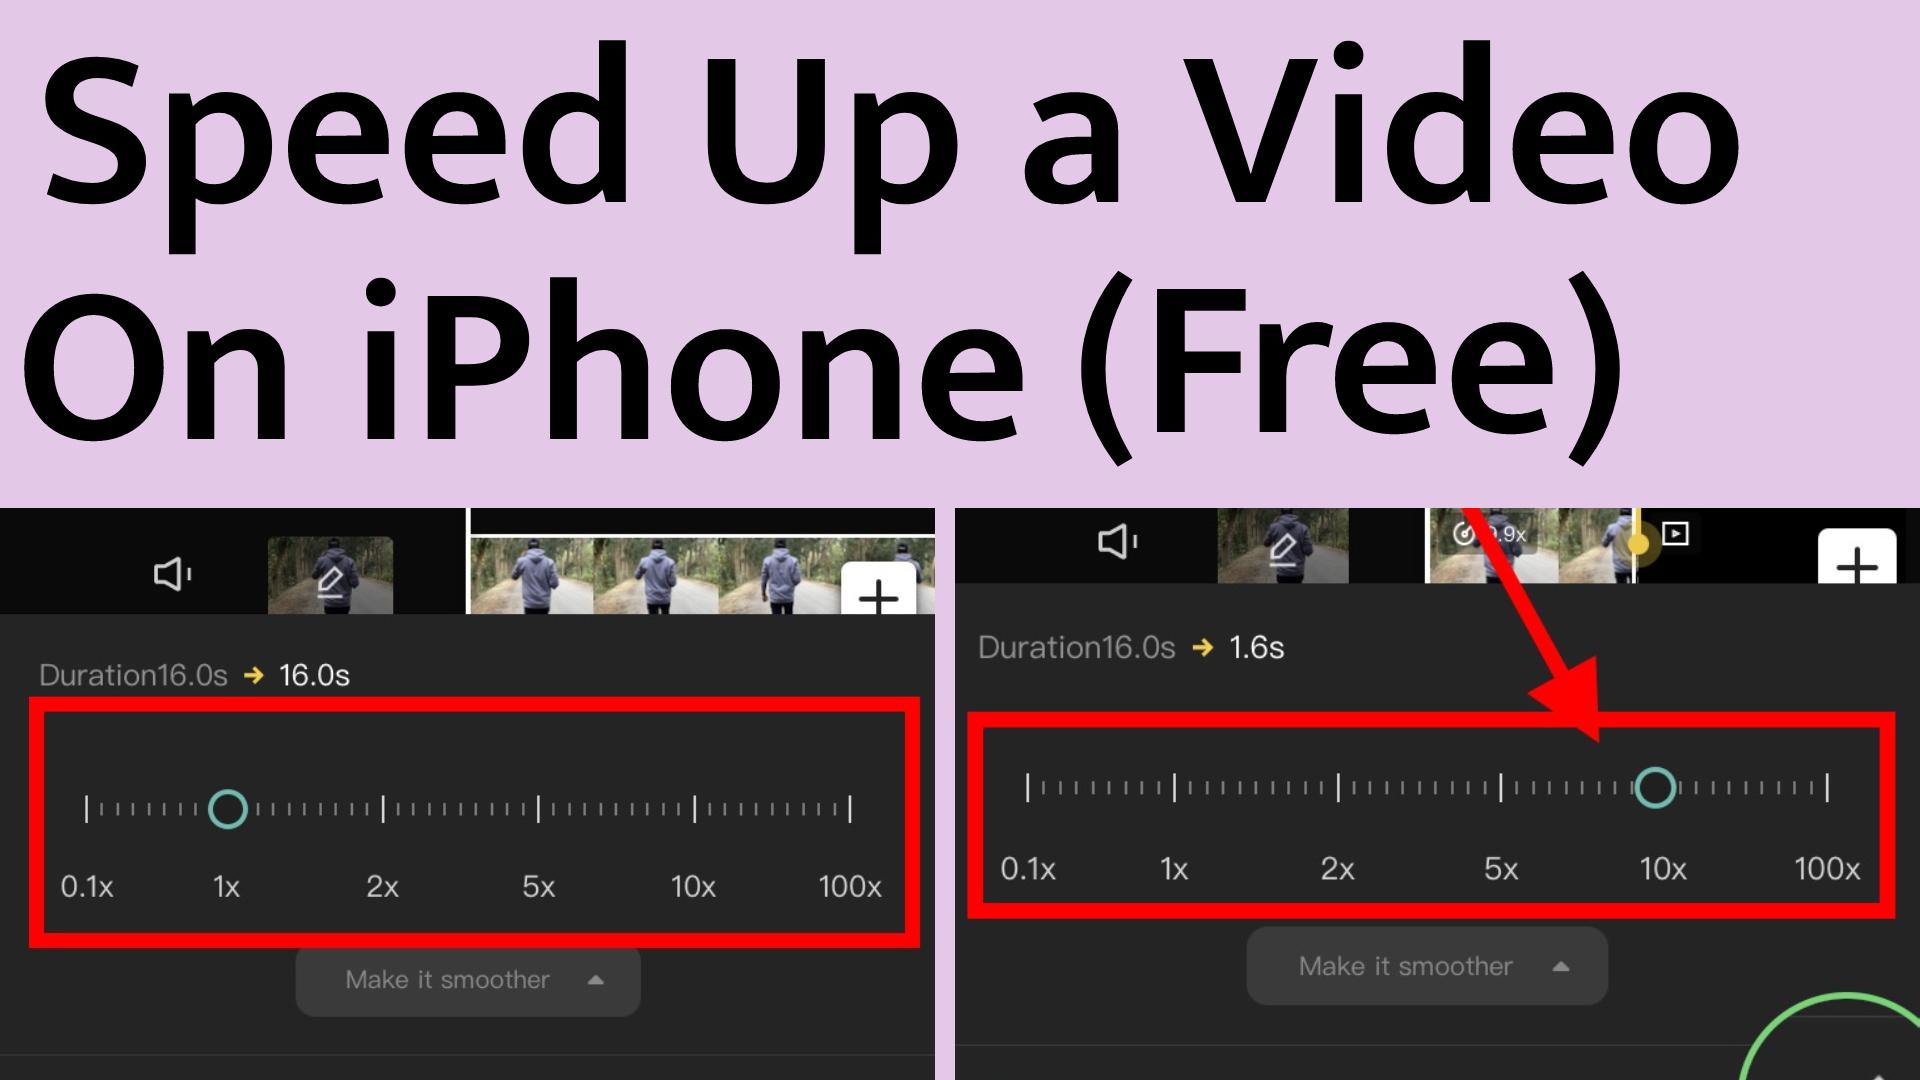 How To Speed Up a Video on iPhone for Instagram